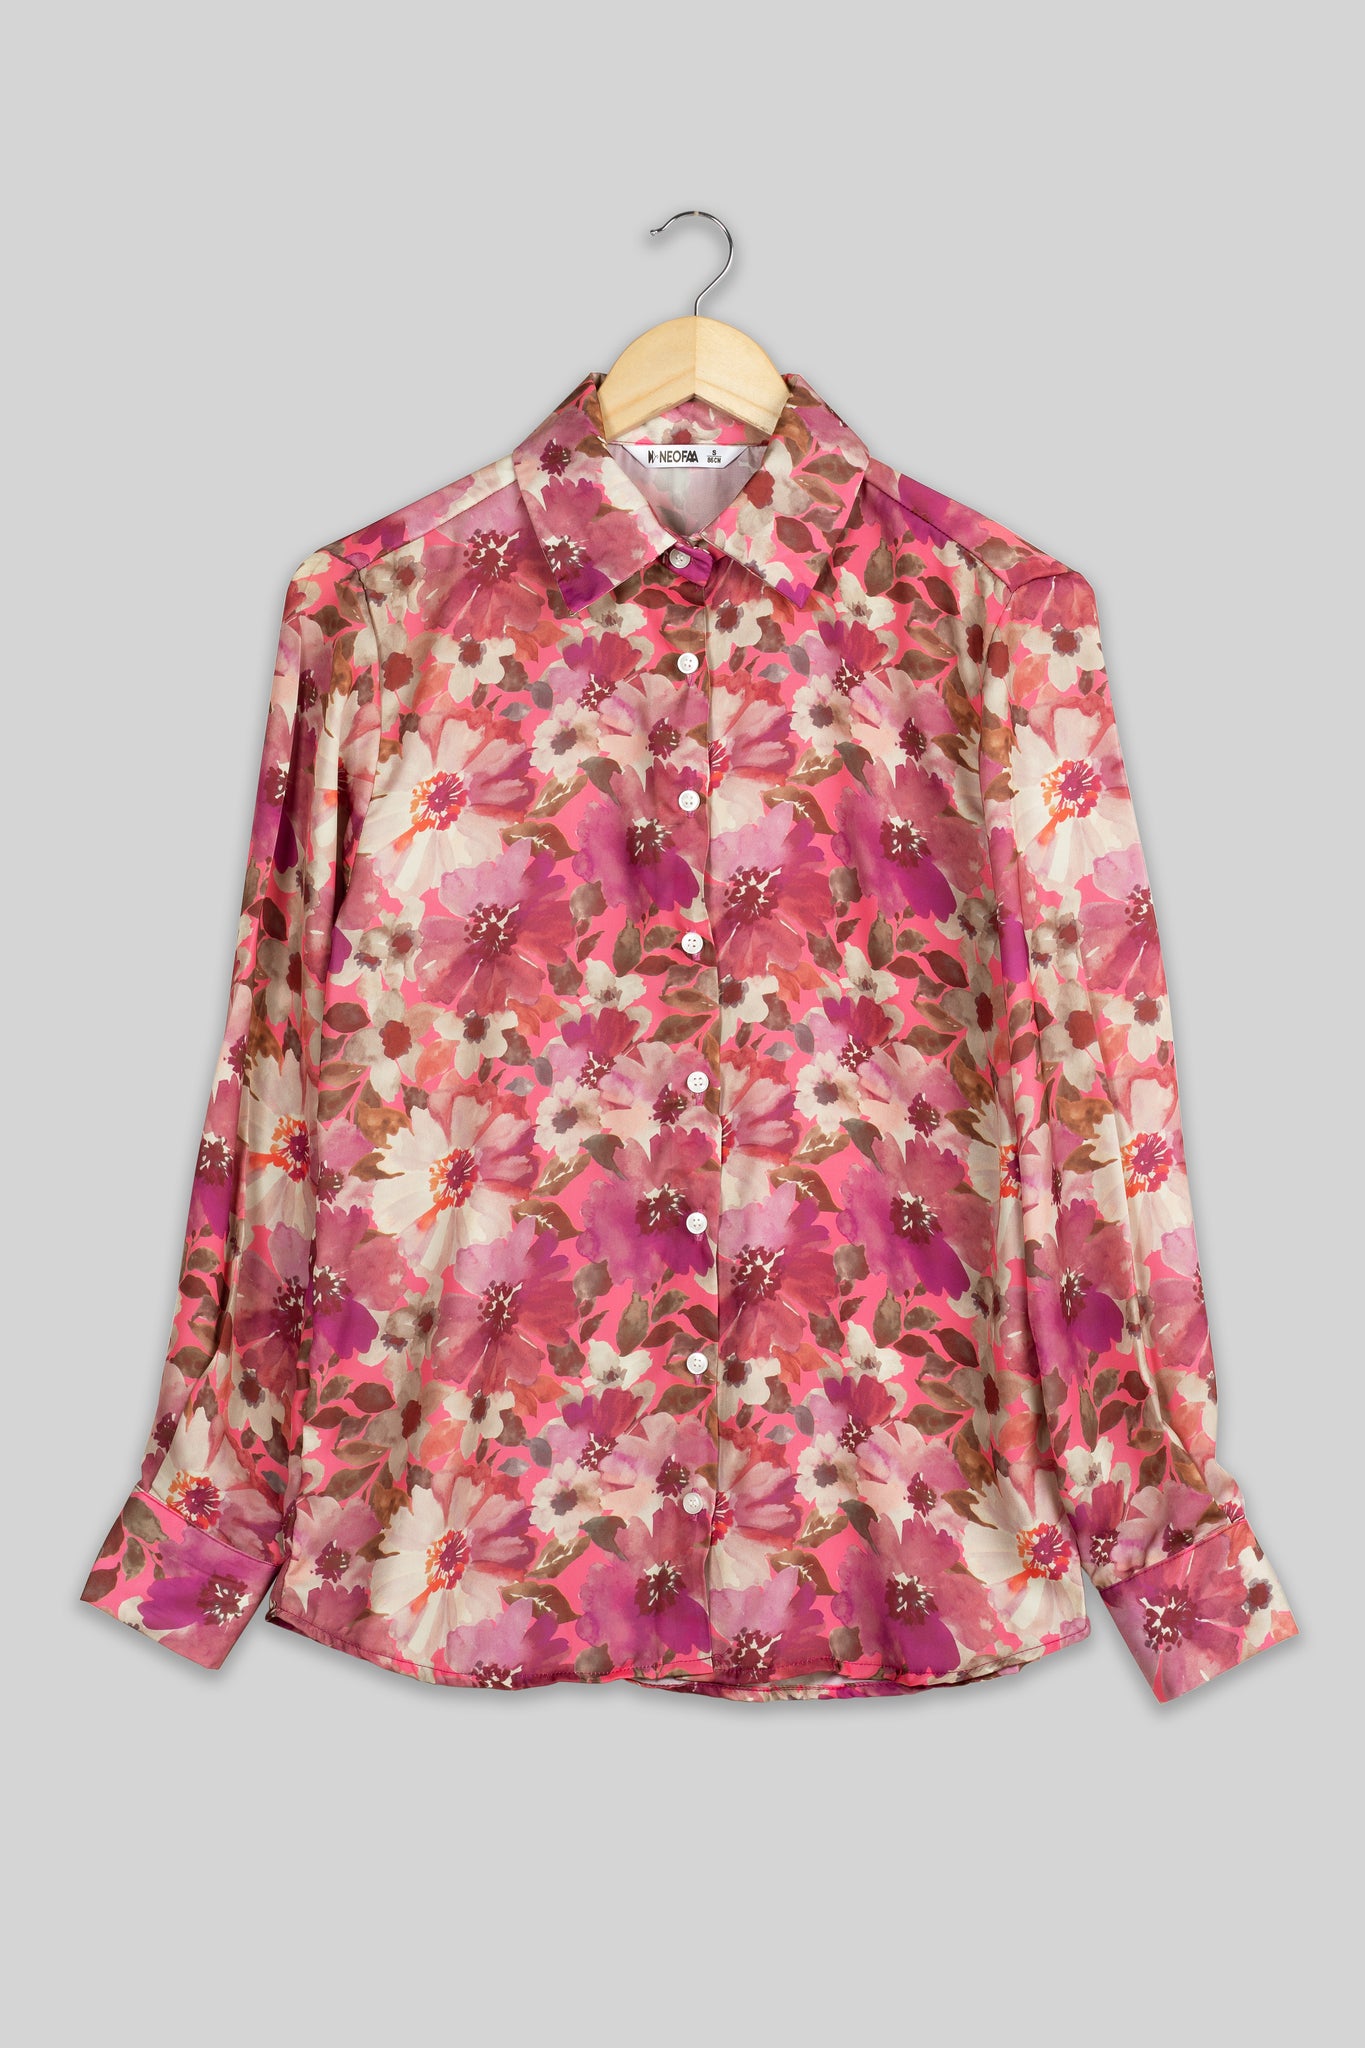 Bestselling Floral Shirt For Women